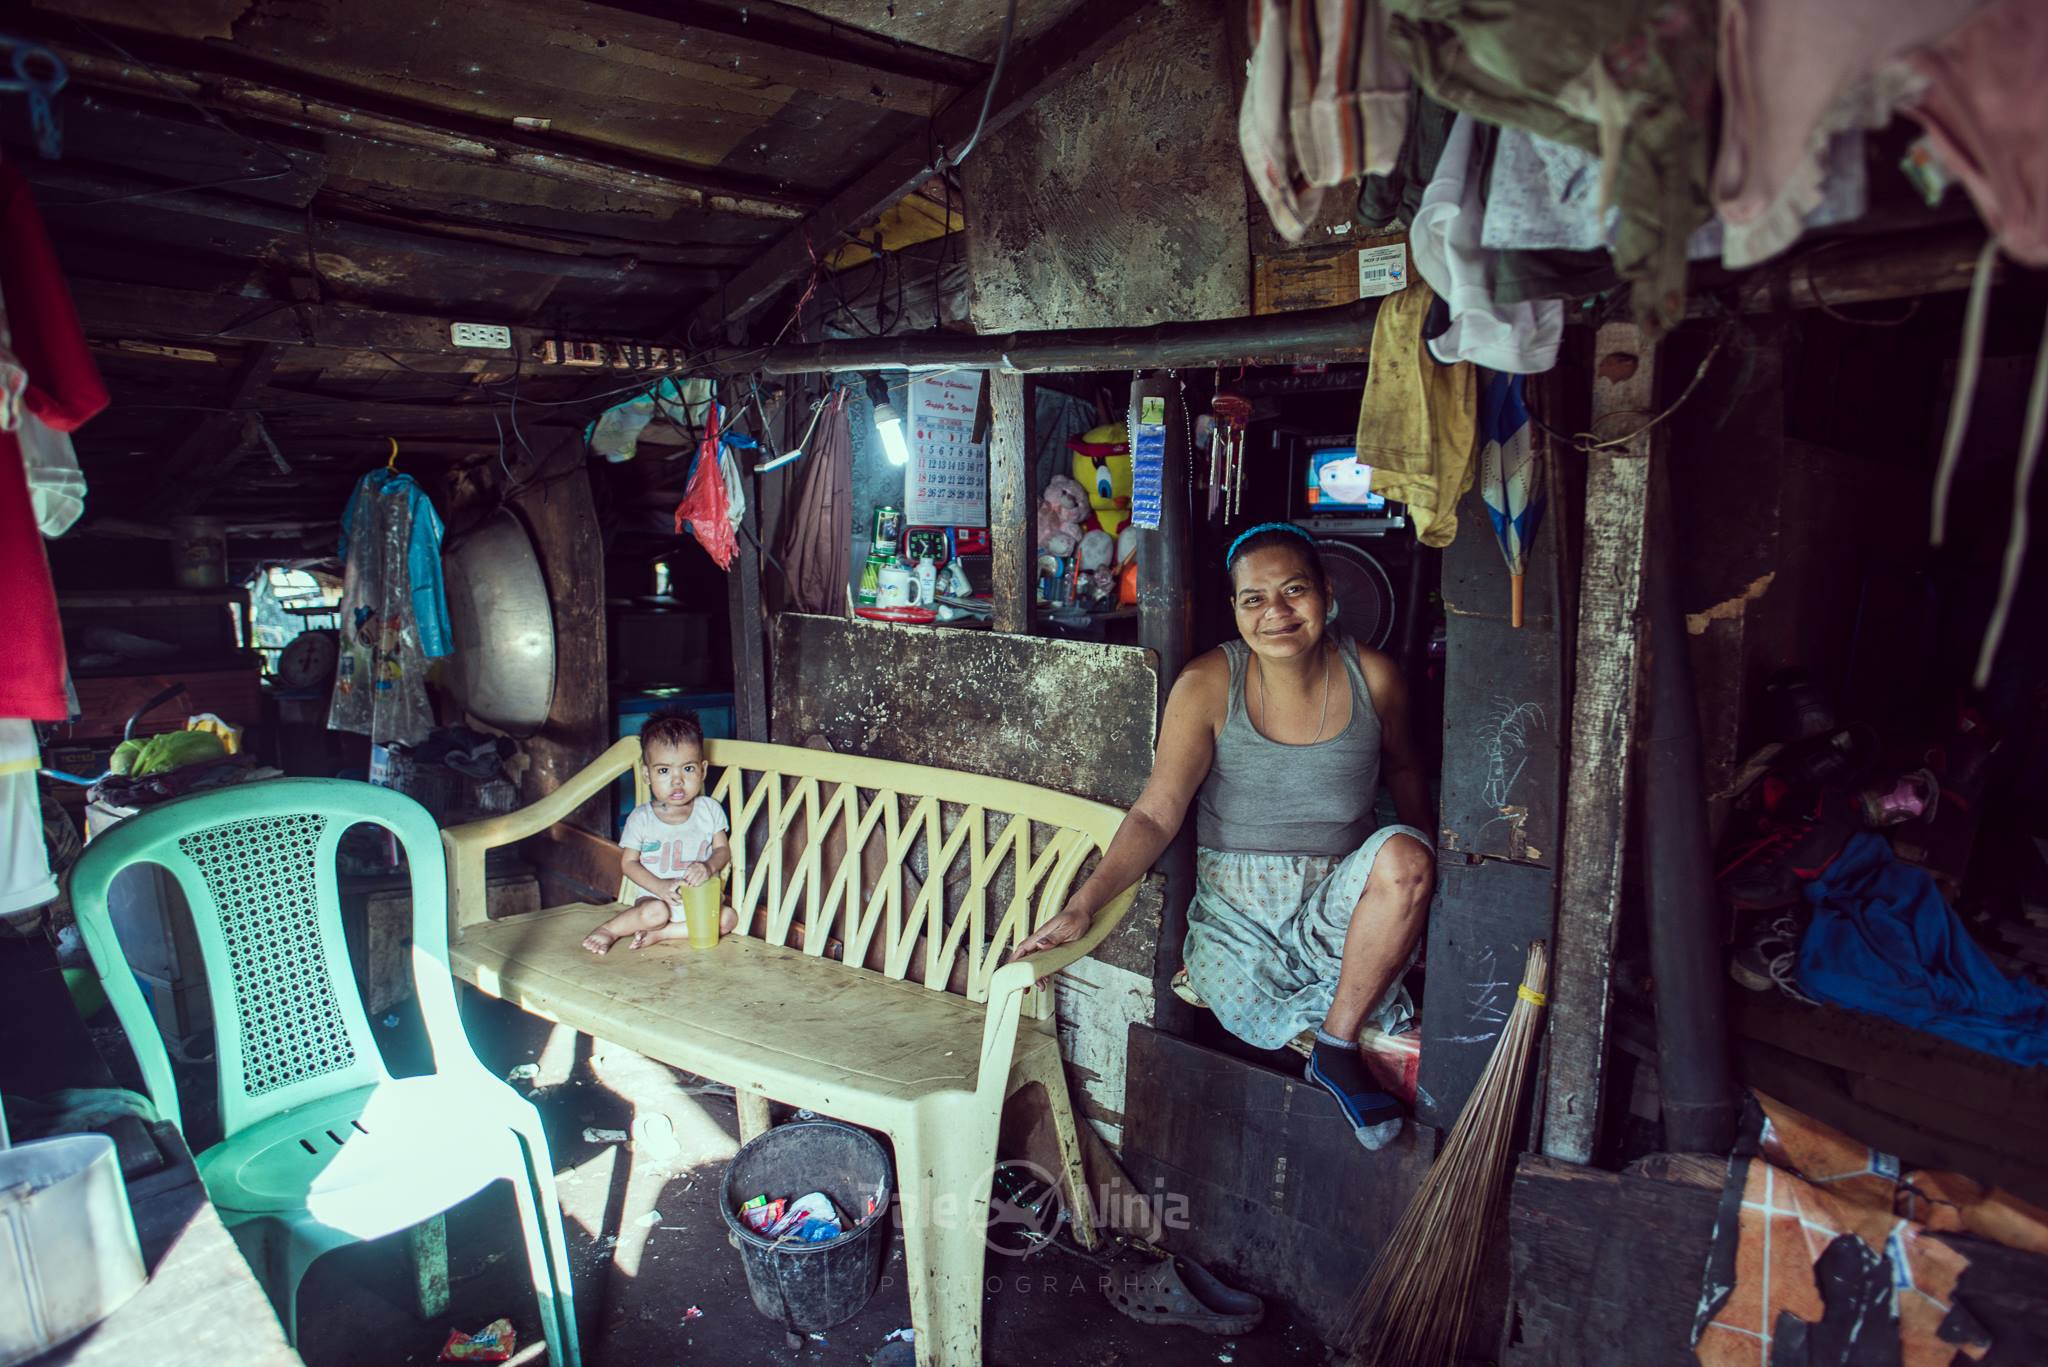  This woman in Smokey Mountain invited us in and offered us coffee. We politely declined, but she was very friendly. 